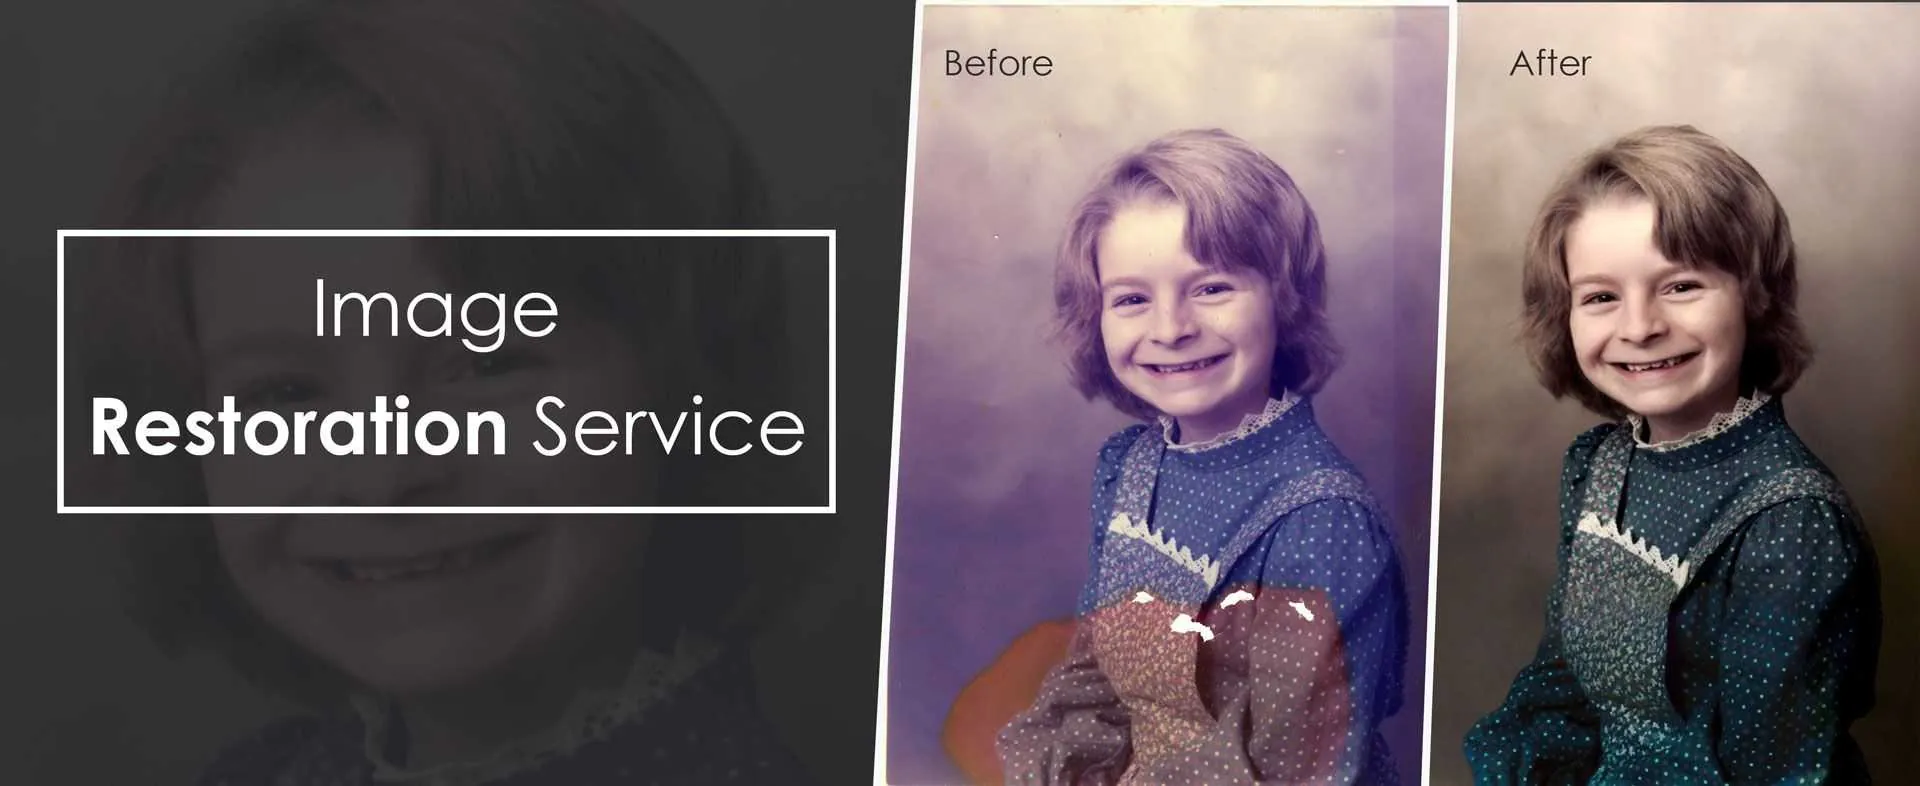 Get Your Images Awe-Inspiringly Restored With ITS